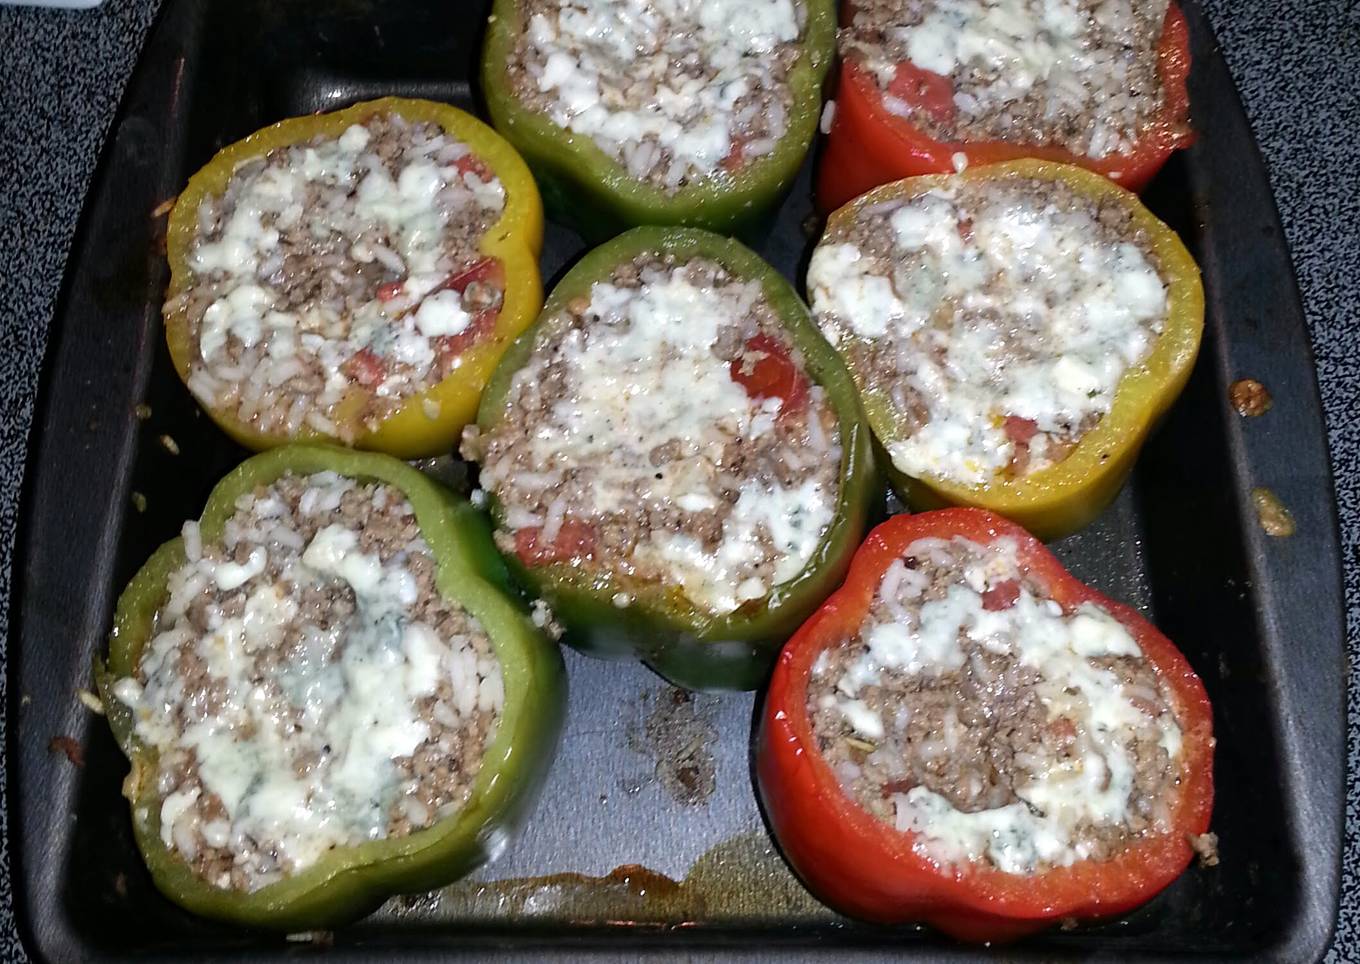 Larry's stuffed bell peppers